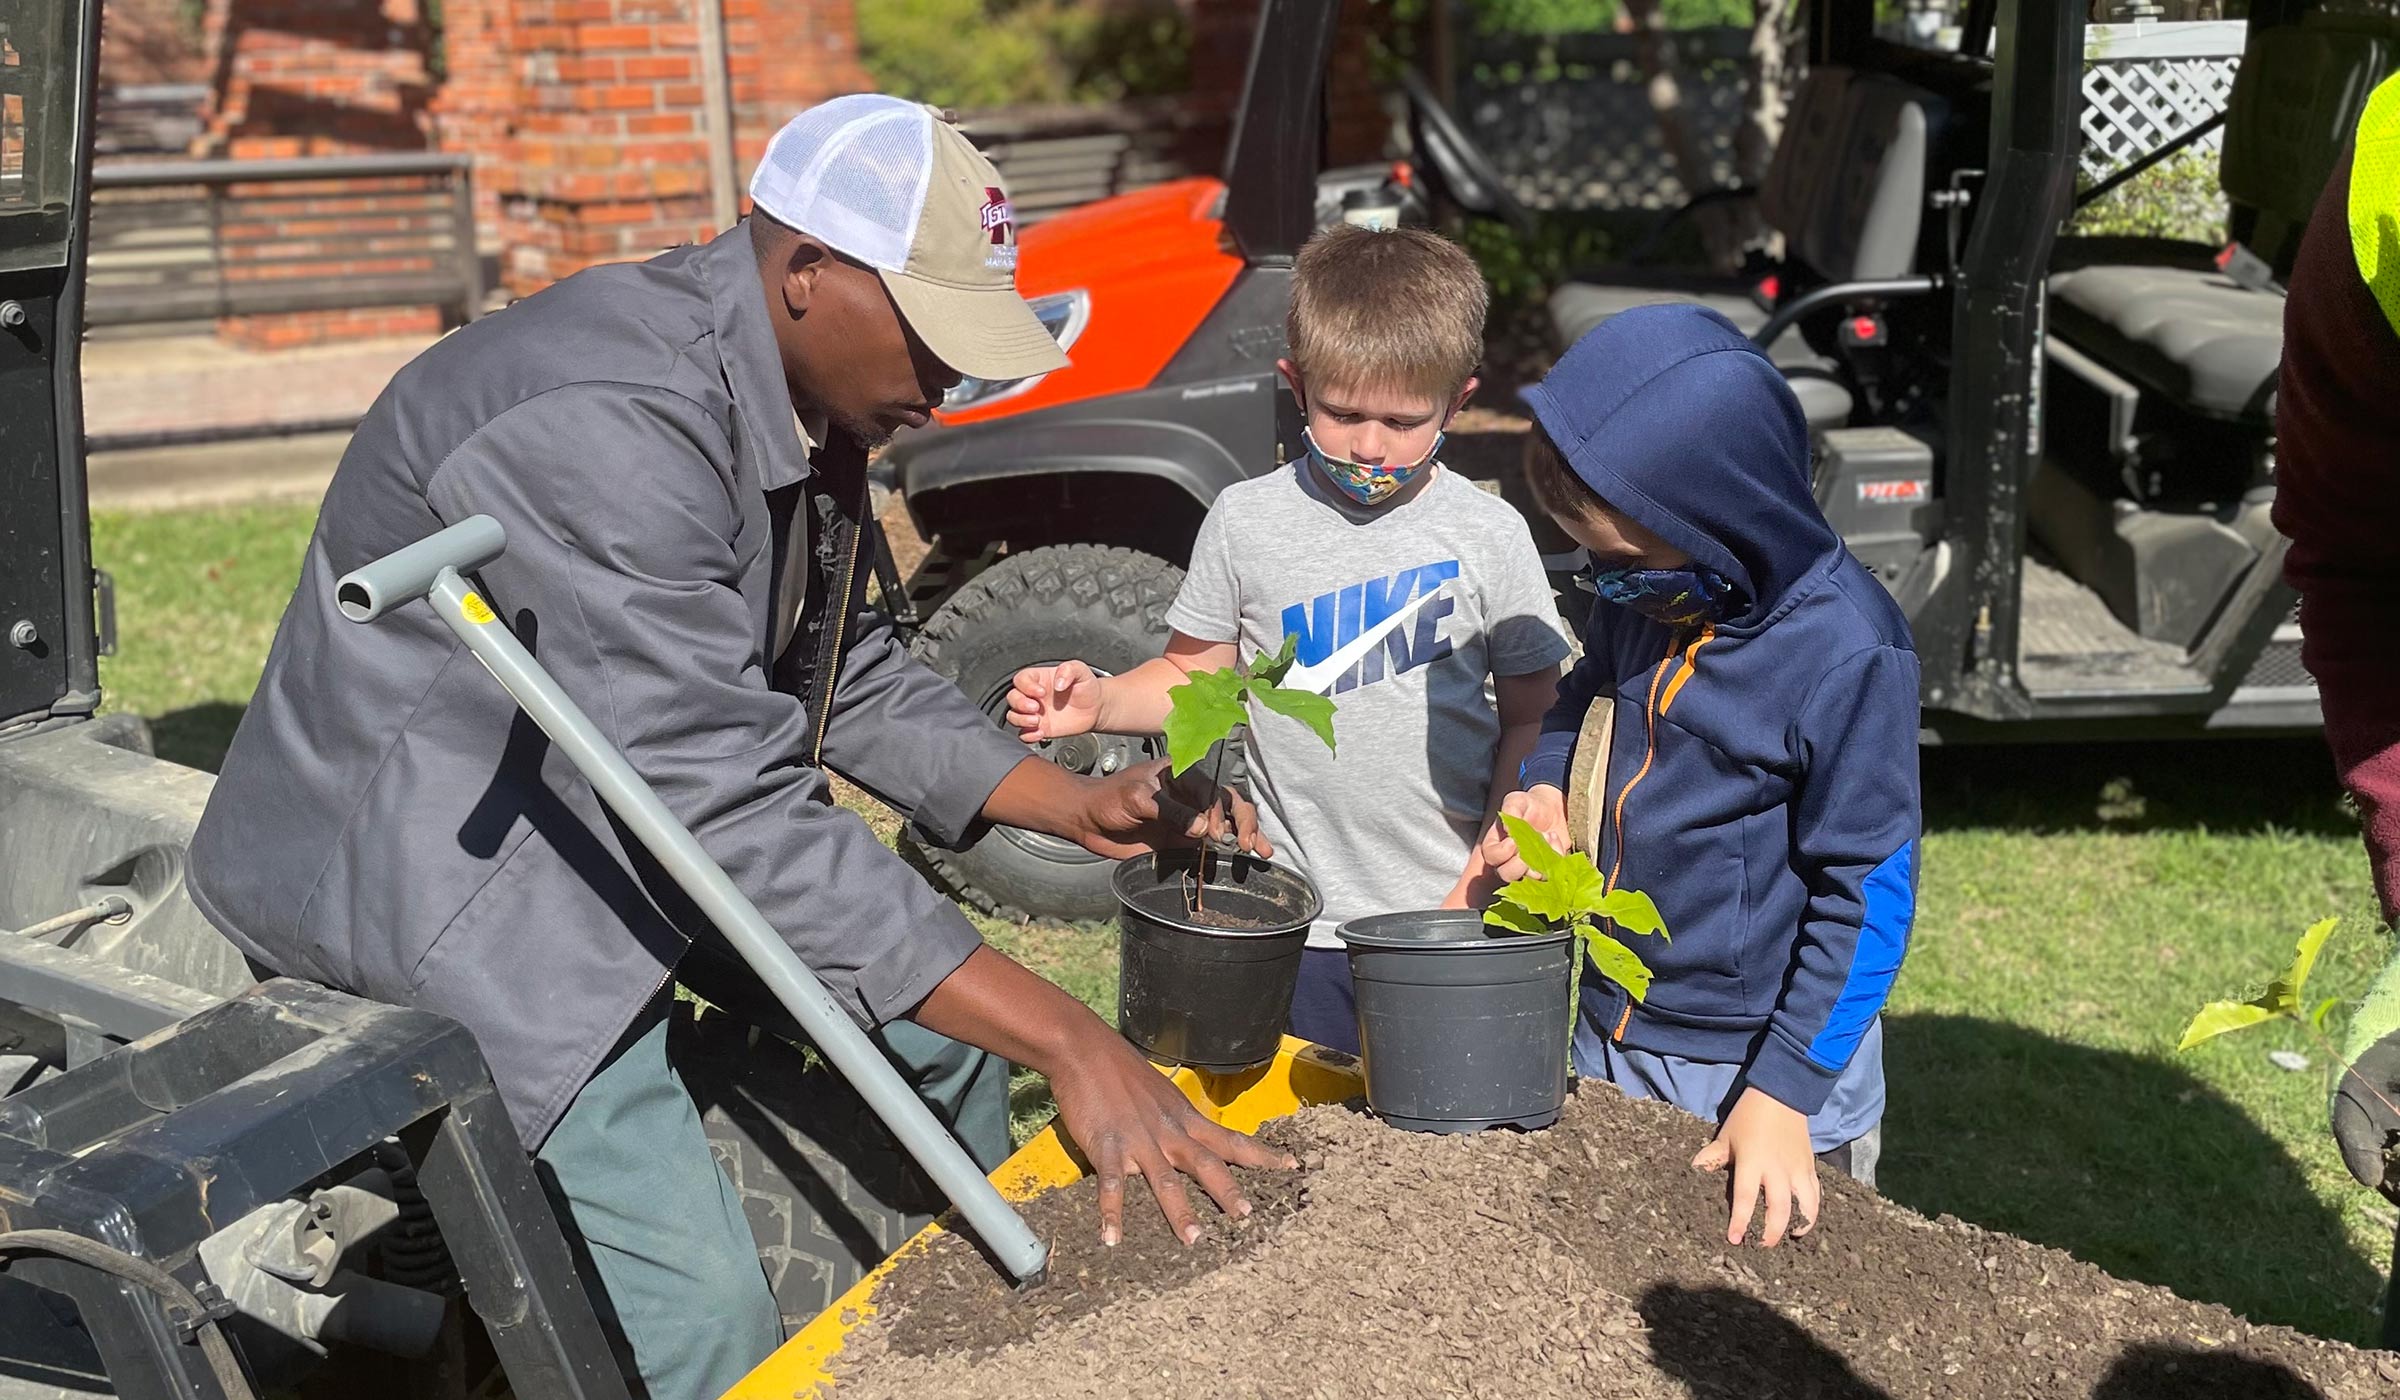 Guy in gray jacket and cap helping two kids add soil to tree clippings in black pot.